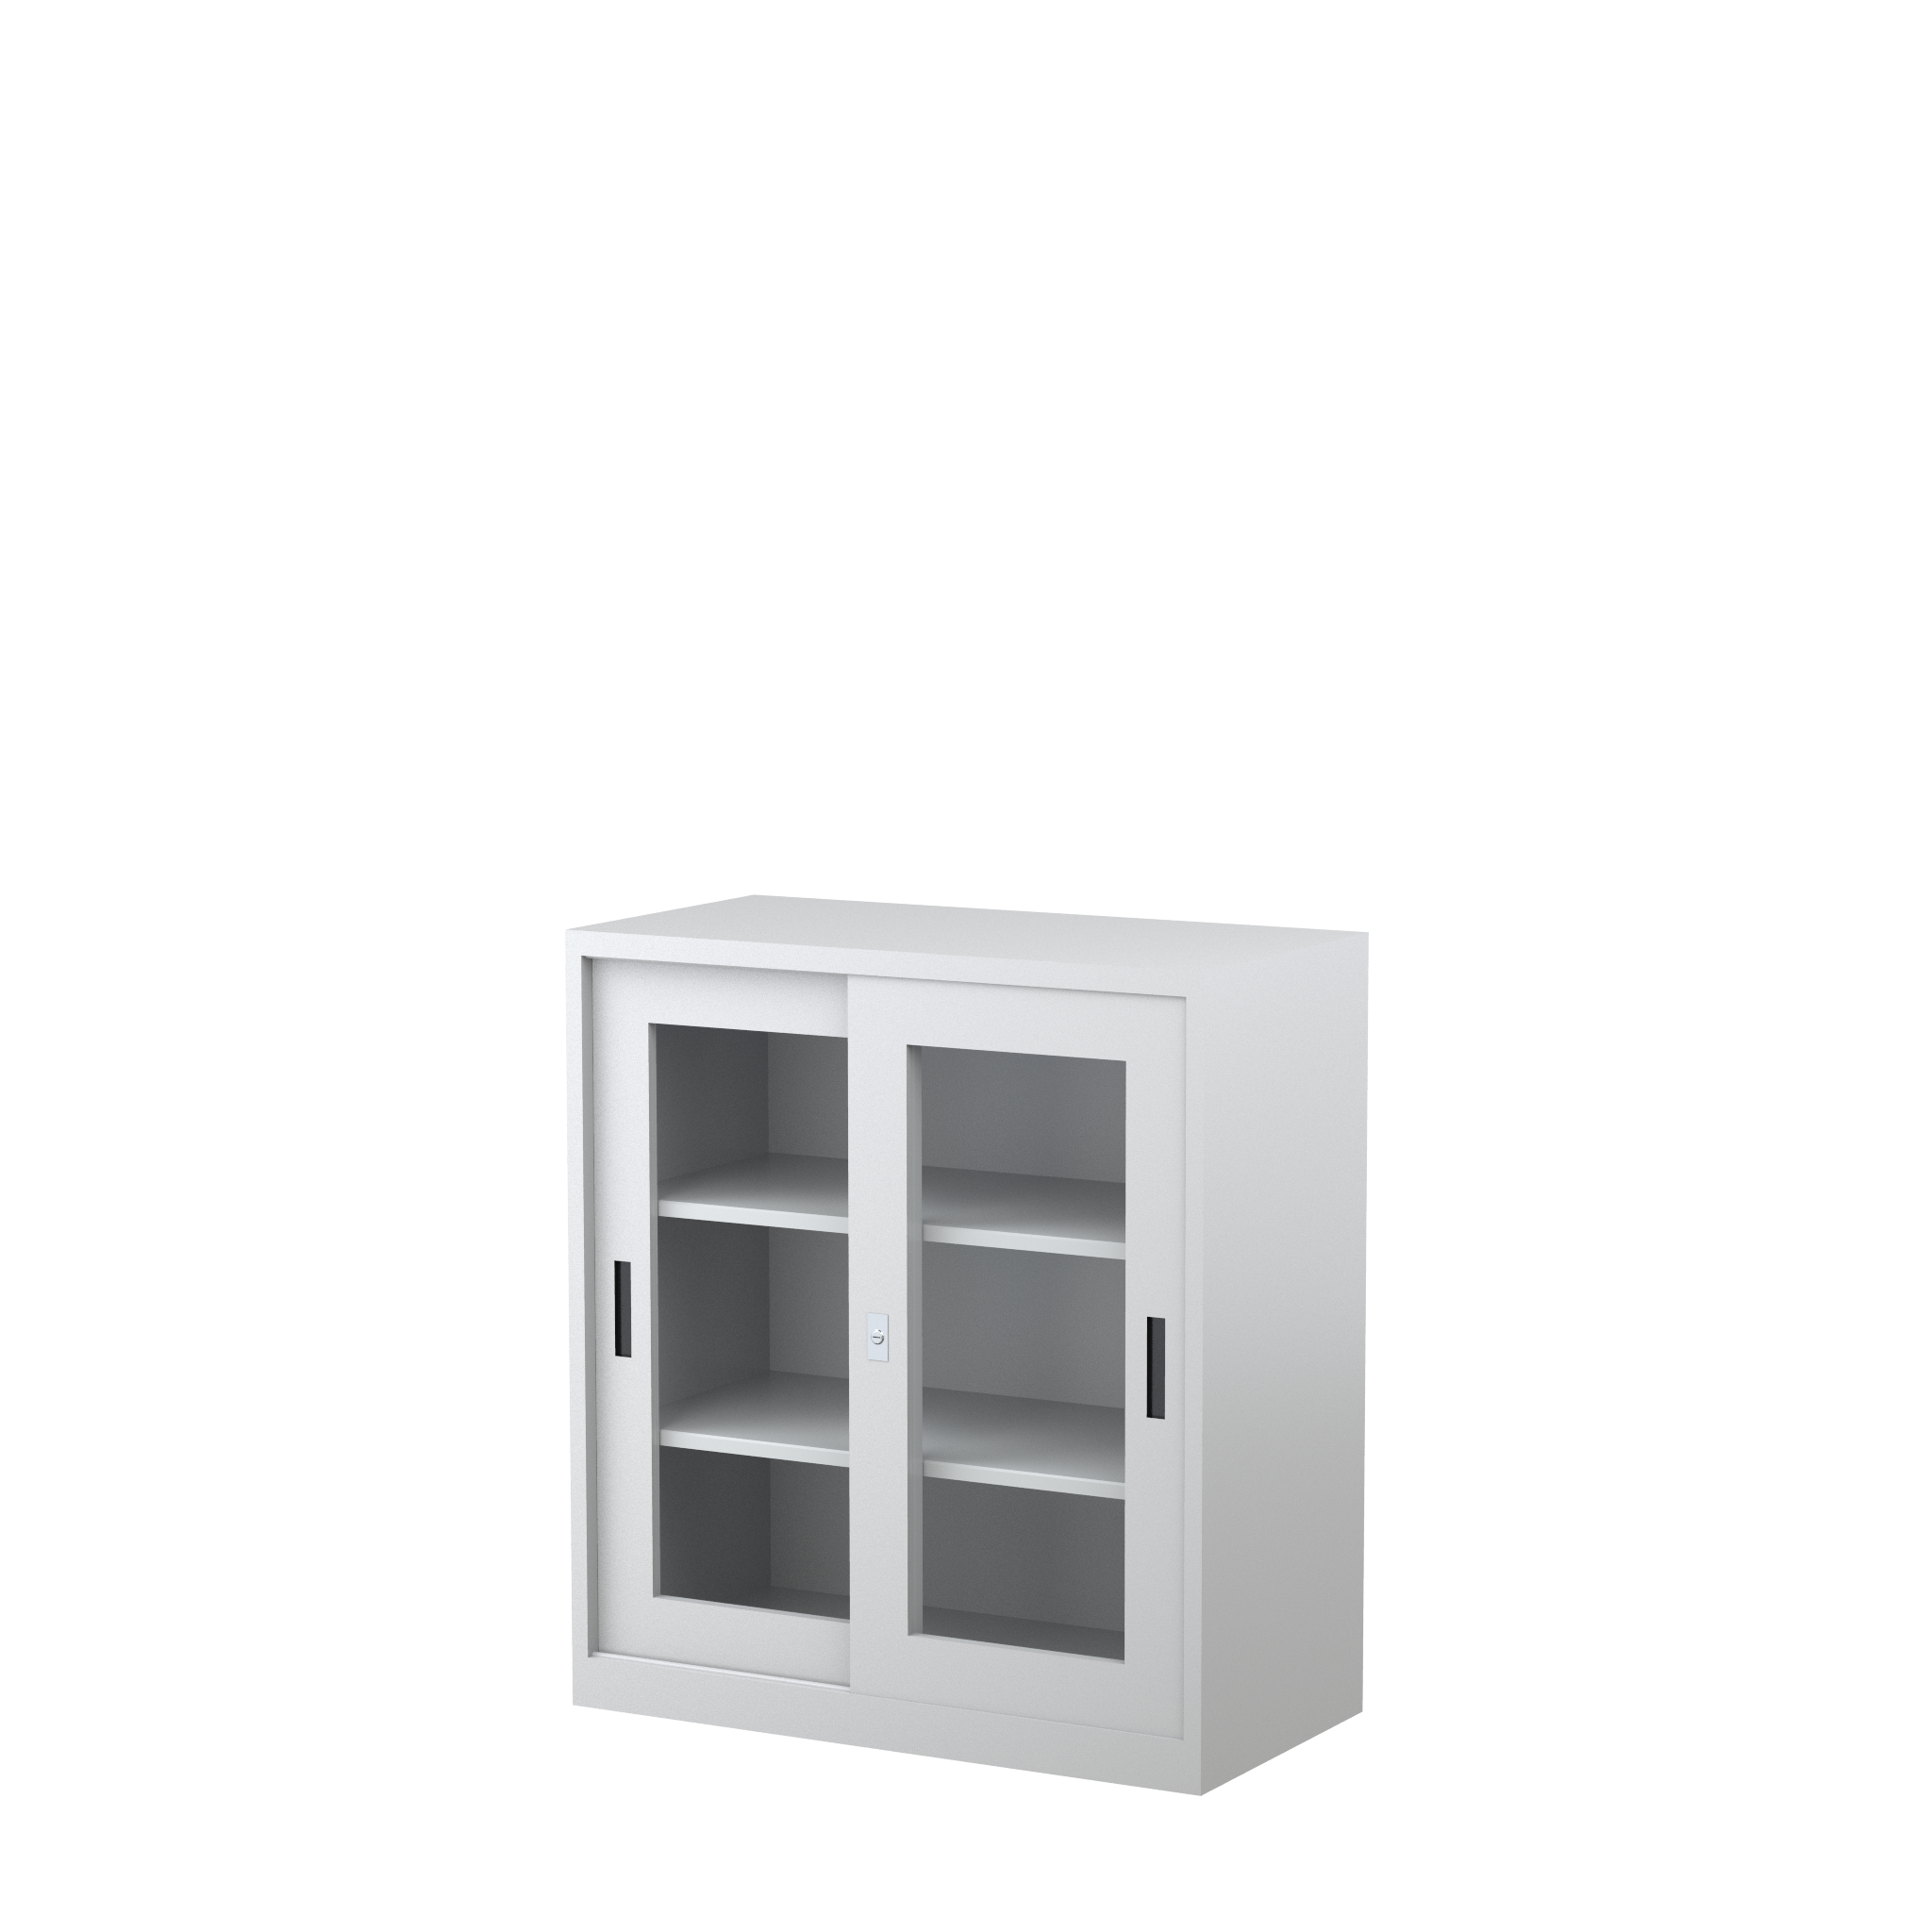 GD1015_914 - STEELCO SG Cabinet 1015H x 915W x 465D - 2 Shelves-WS.png